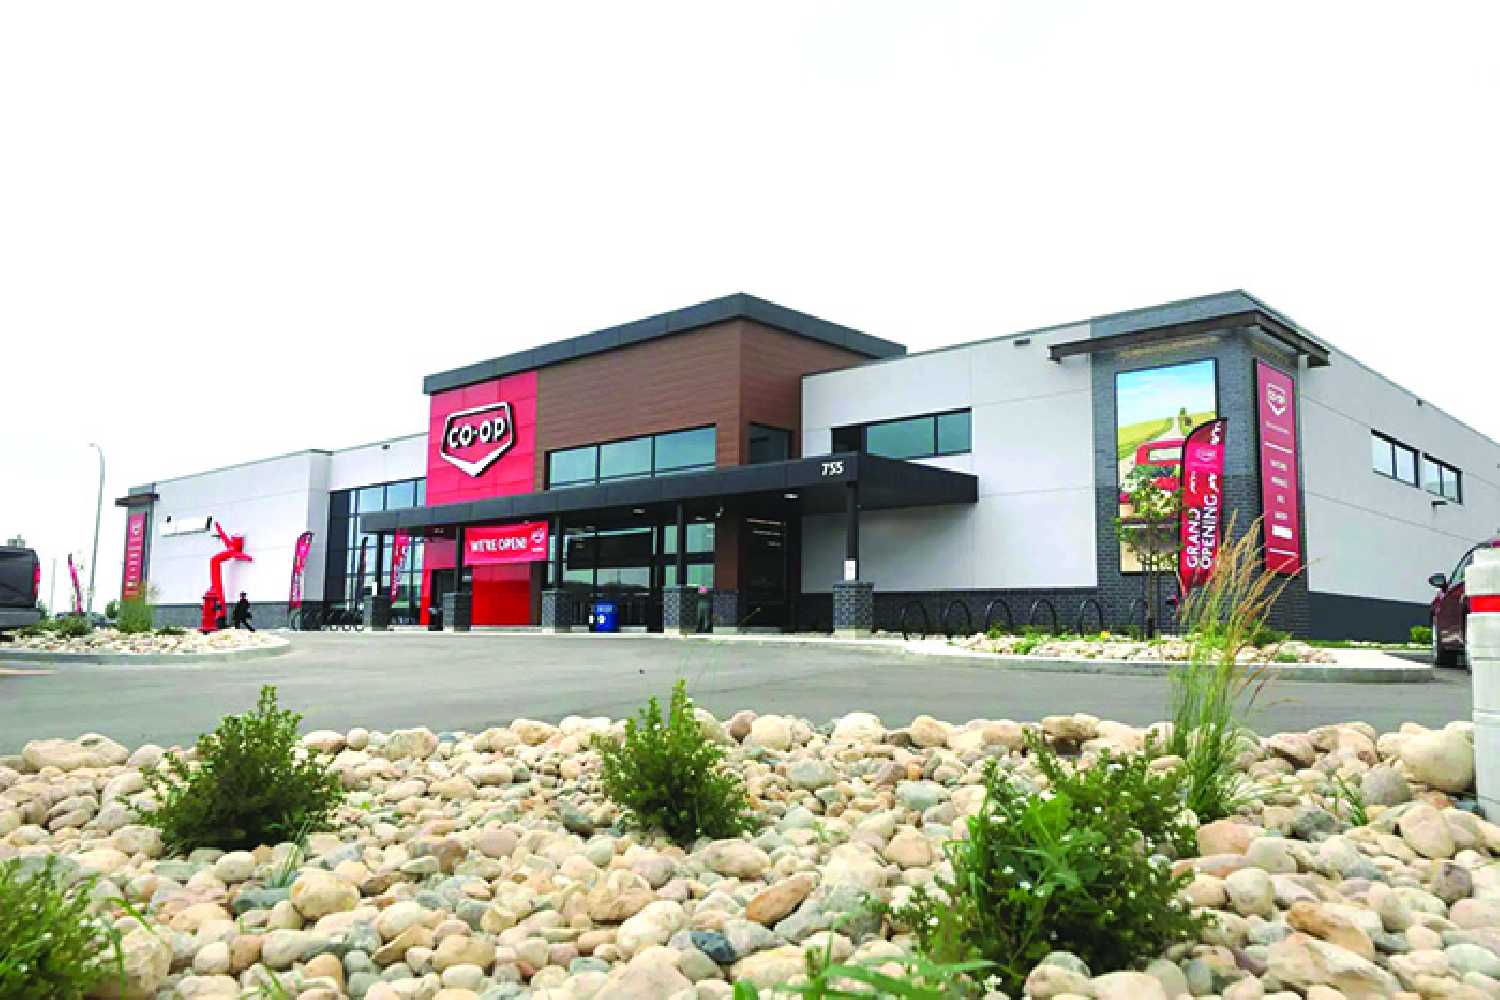 Borderland Co-op has announced it will build a new 30,000 square foot grocery store in Moosomin. Construction will start within weeks, and the building should be completed in late 2024 or early 2025.